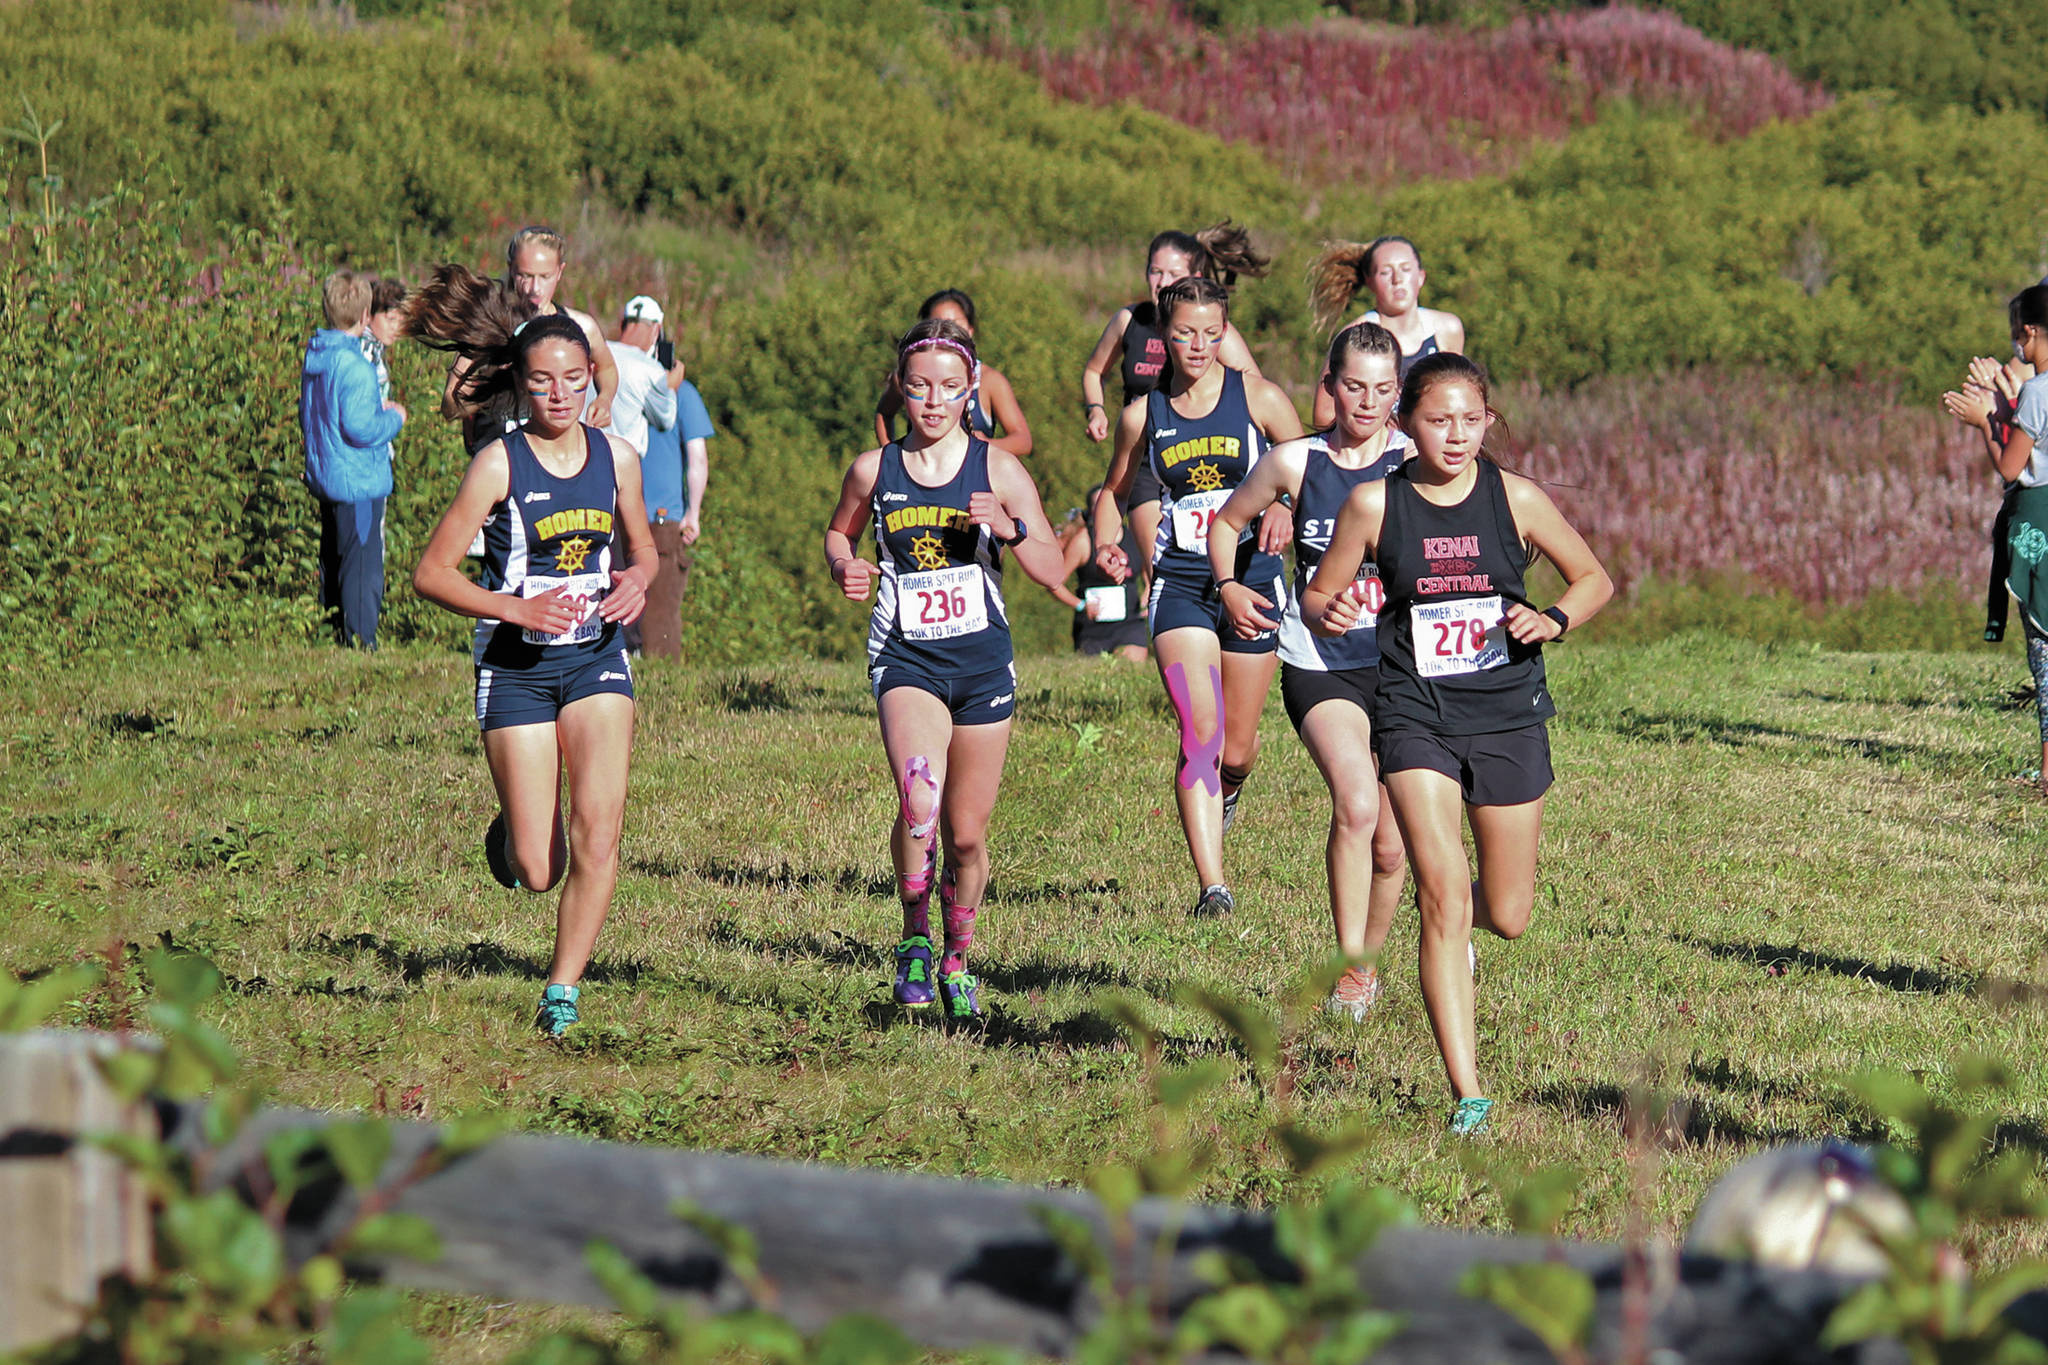 Kenai’s Emilee Wilson leads a group of runners up a hill during the varsity girls’ 5 kilometer race Friday, Sept. 11, 2020 at the Lookout Mountain Trails near Homer, Alaska. (Photo by Megan Pacer/Homer News)